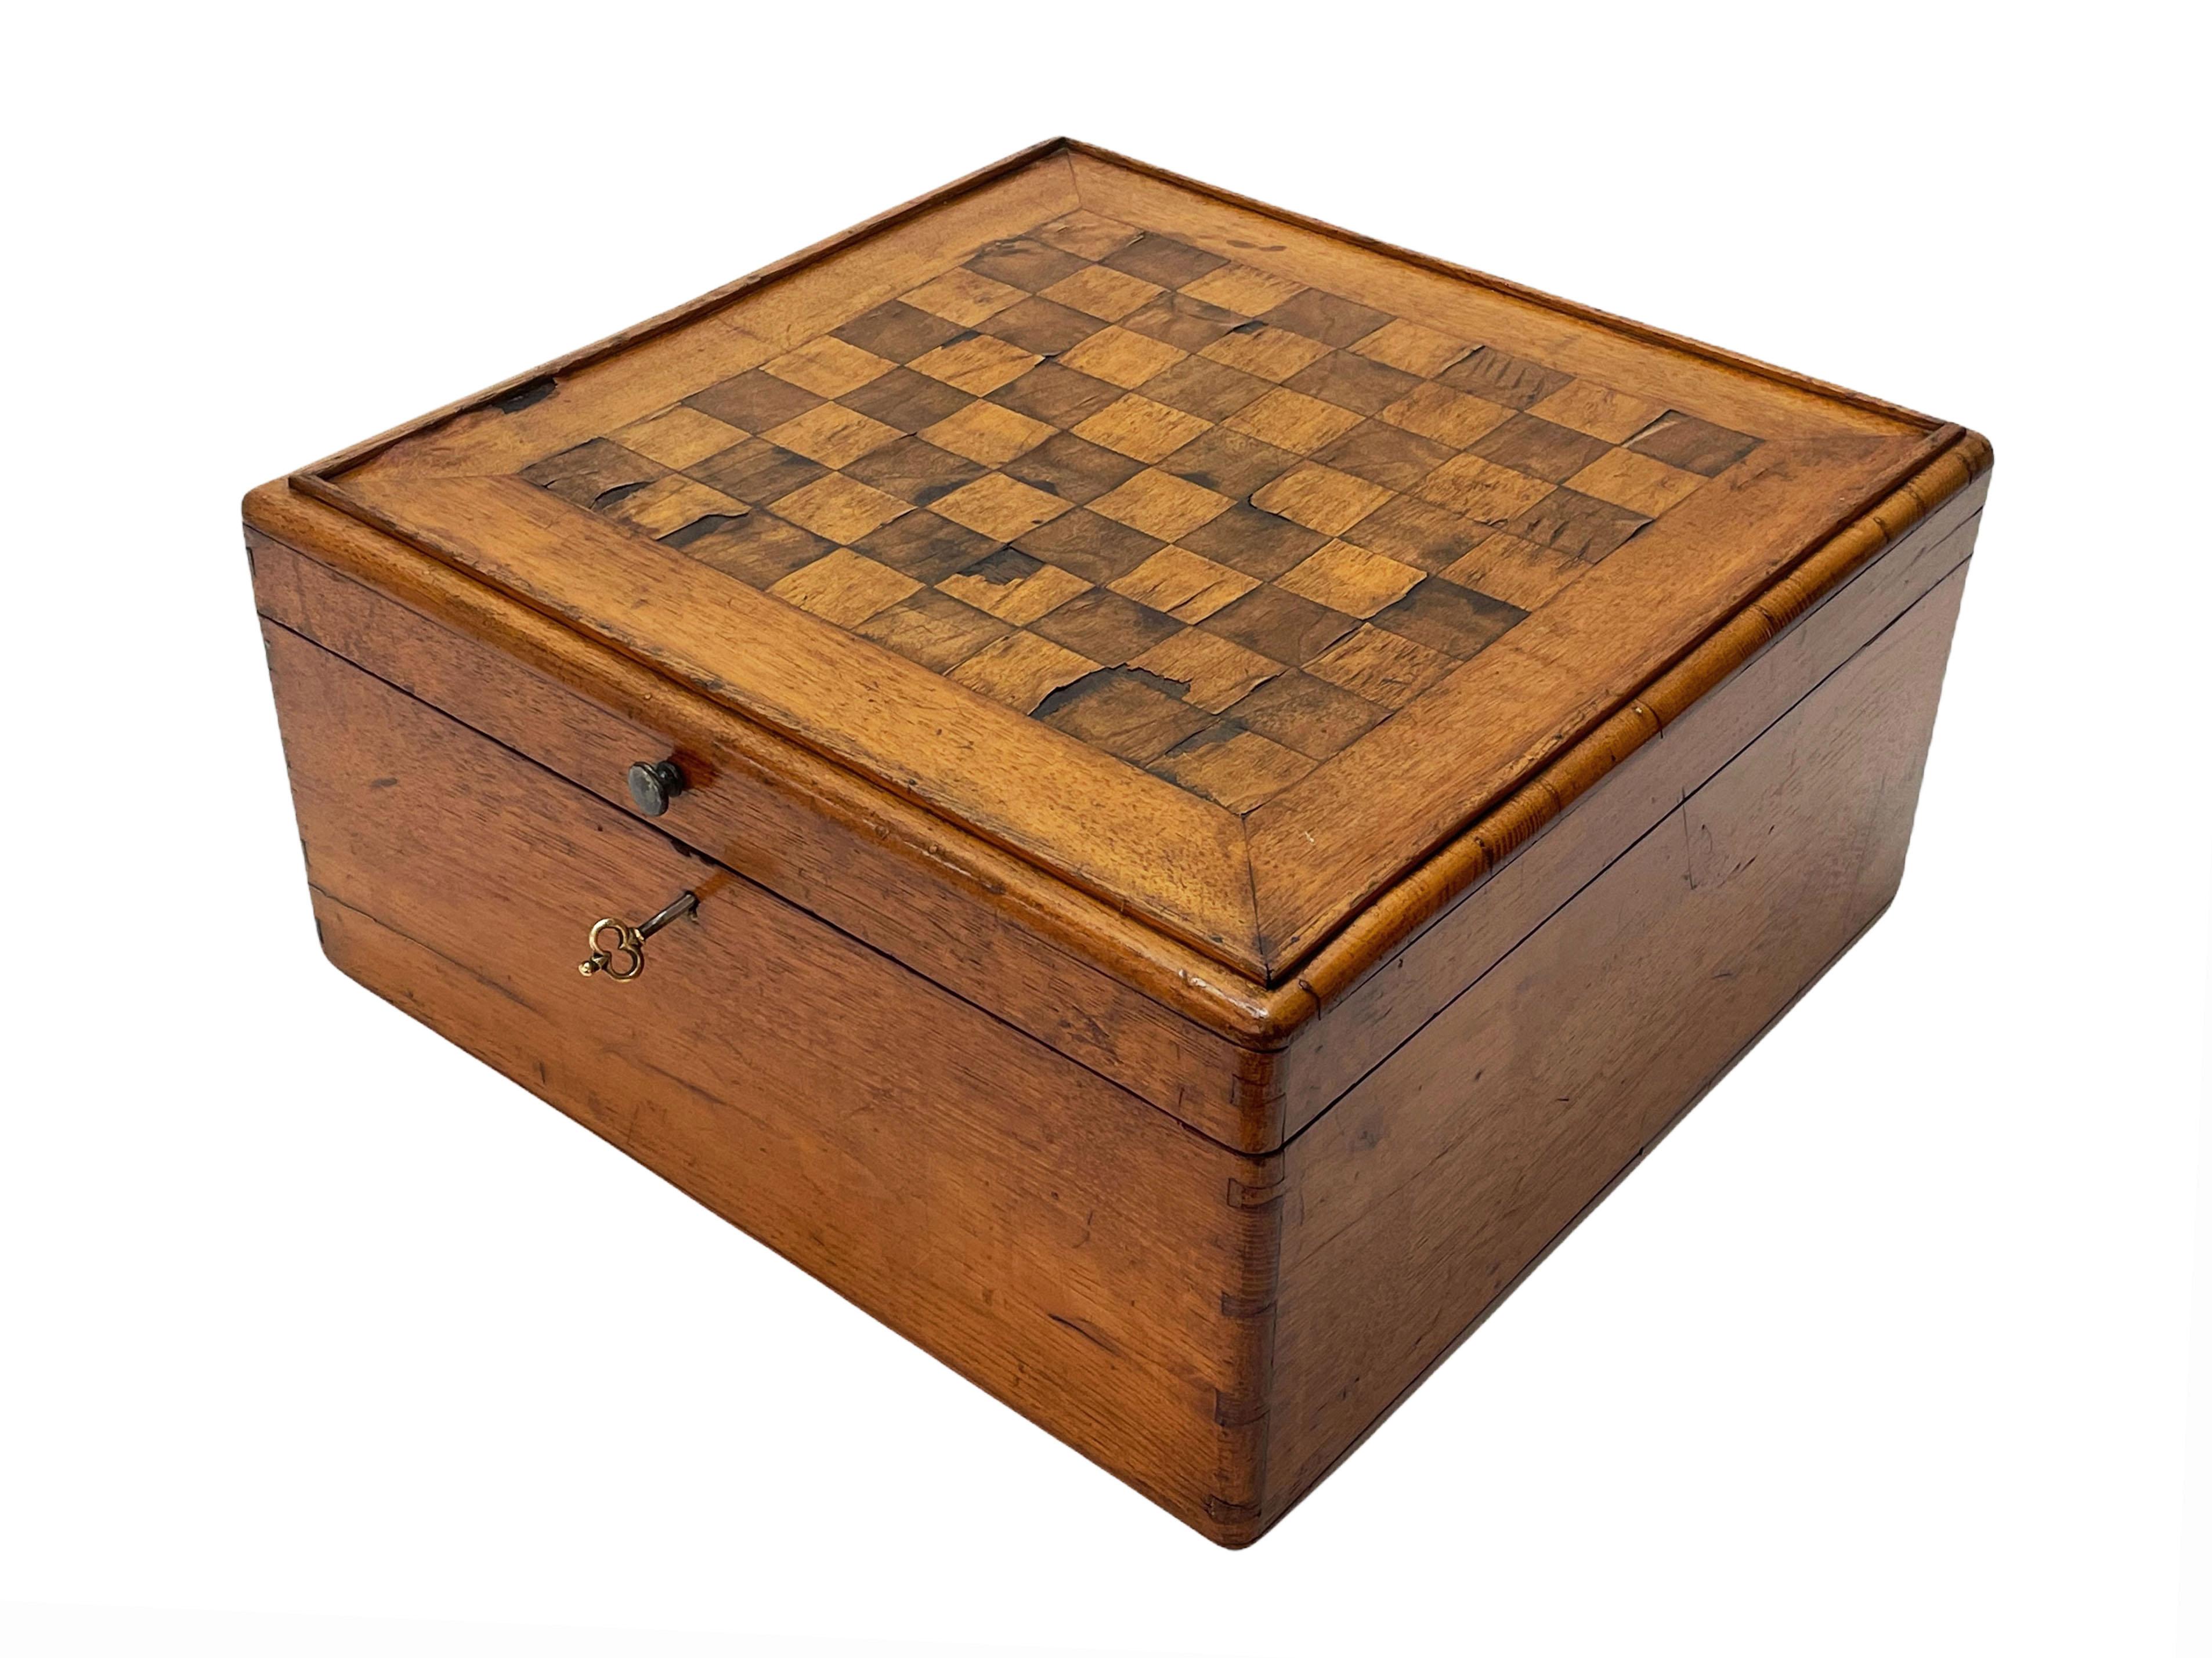 Early 20th Century Large Wooden Inlaid Squared Italian Chessboard Box, 1900s For Sale